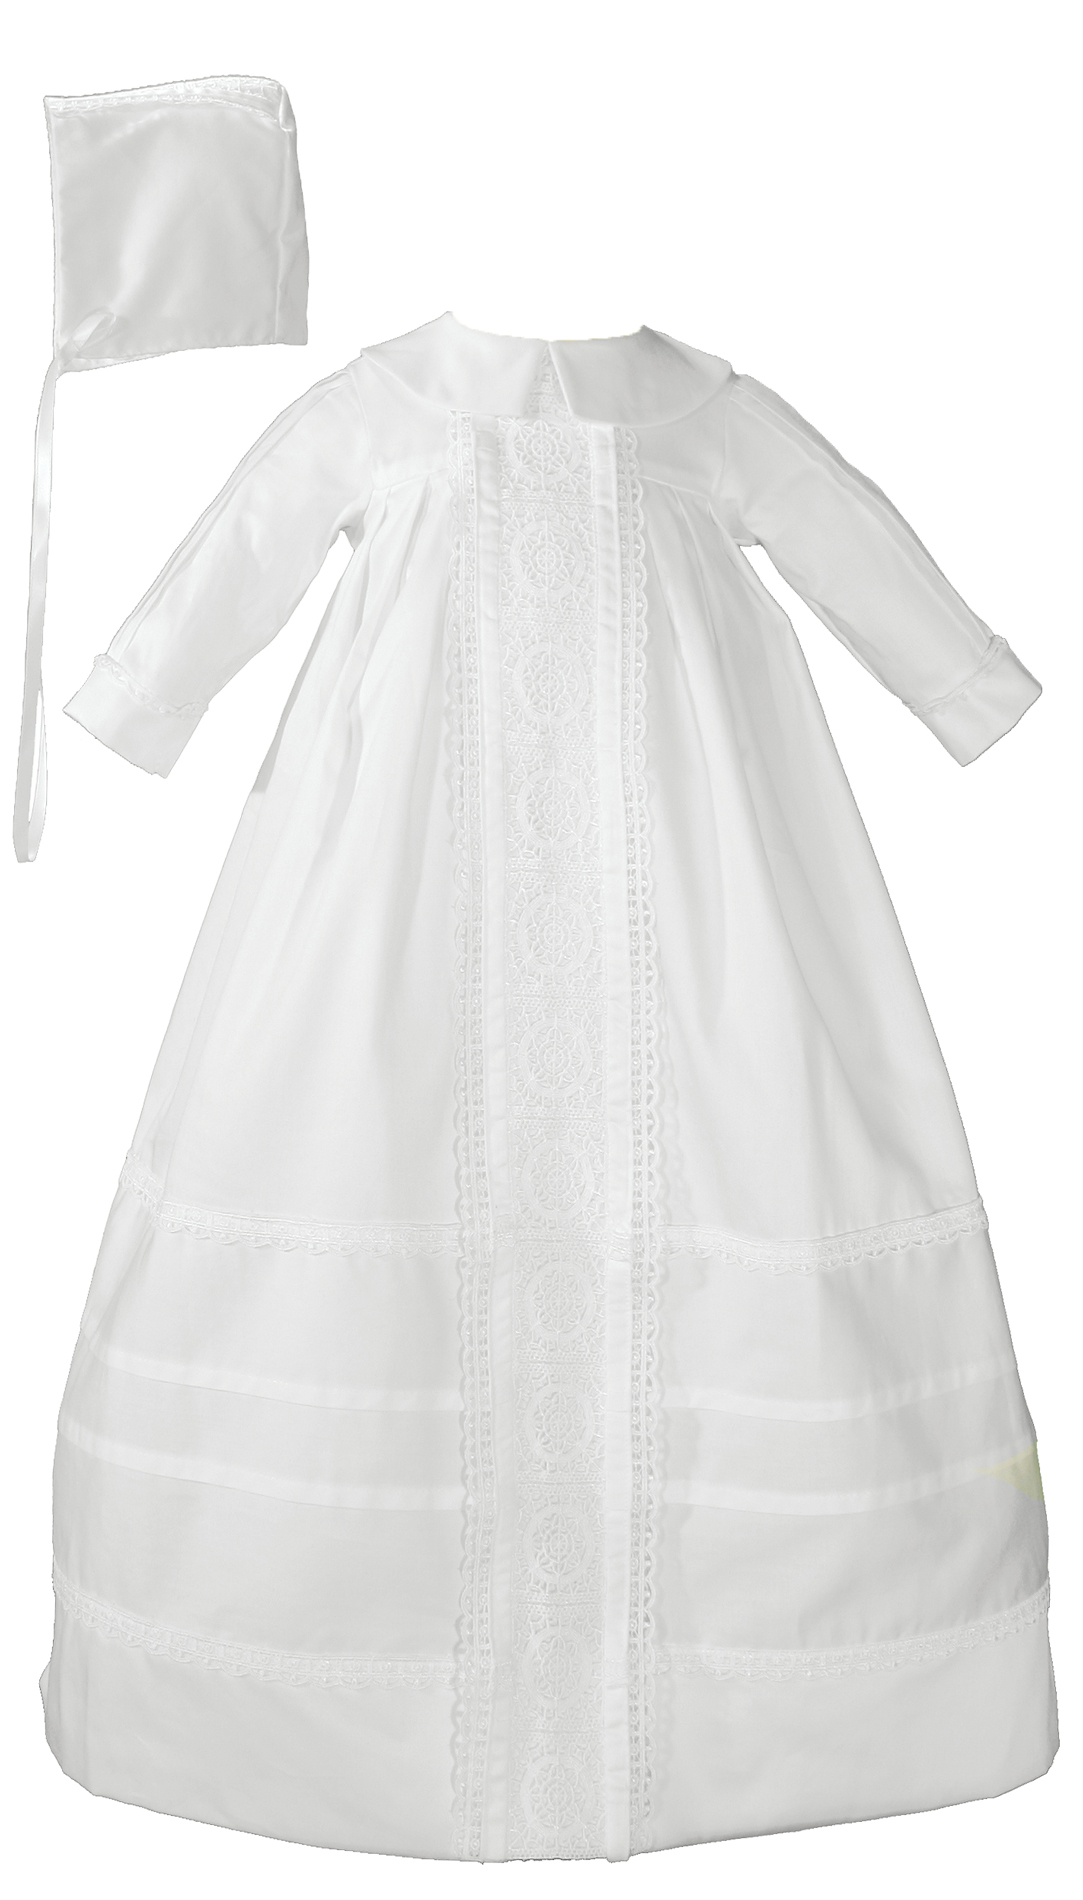 Cotton Sateen Bishop's Christening Baptism Gown and Bonnet - Little Things Mean a Lot